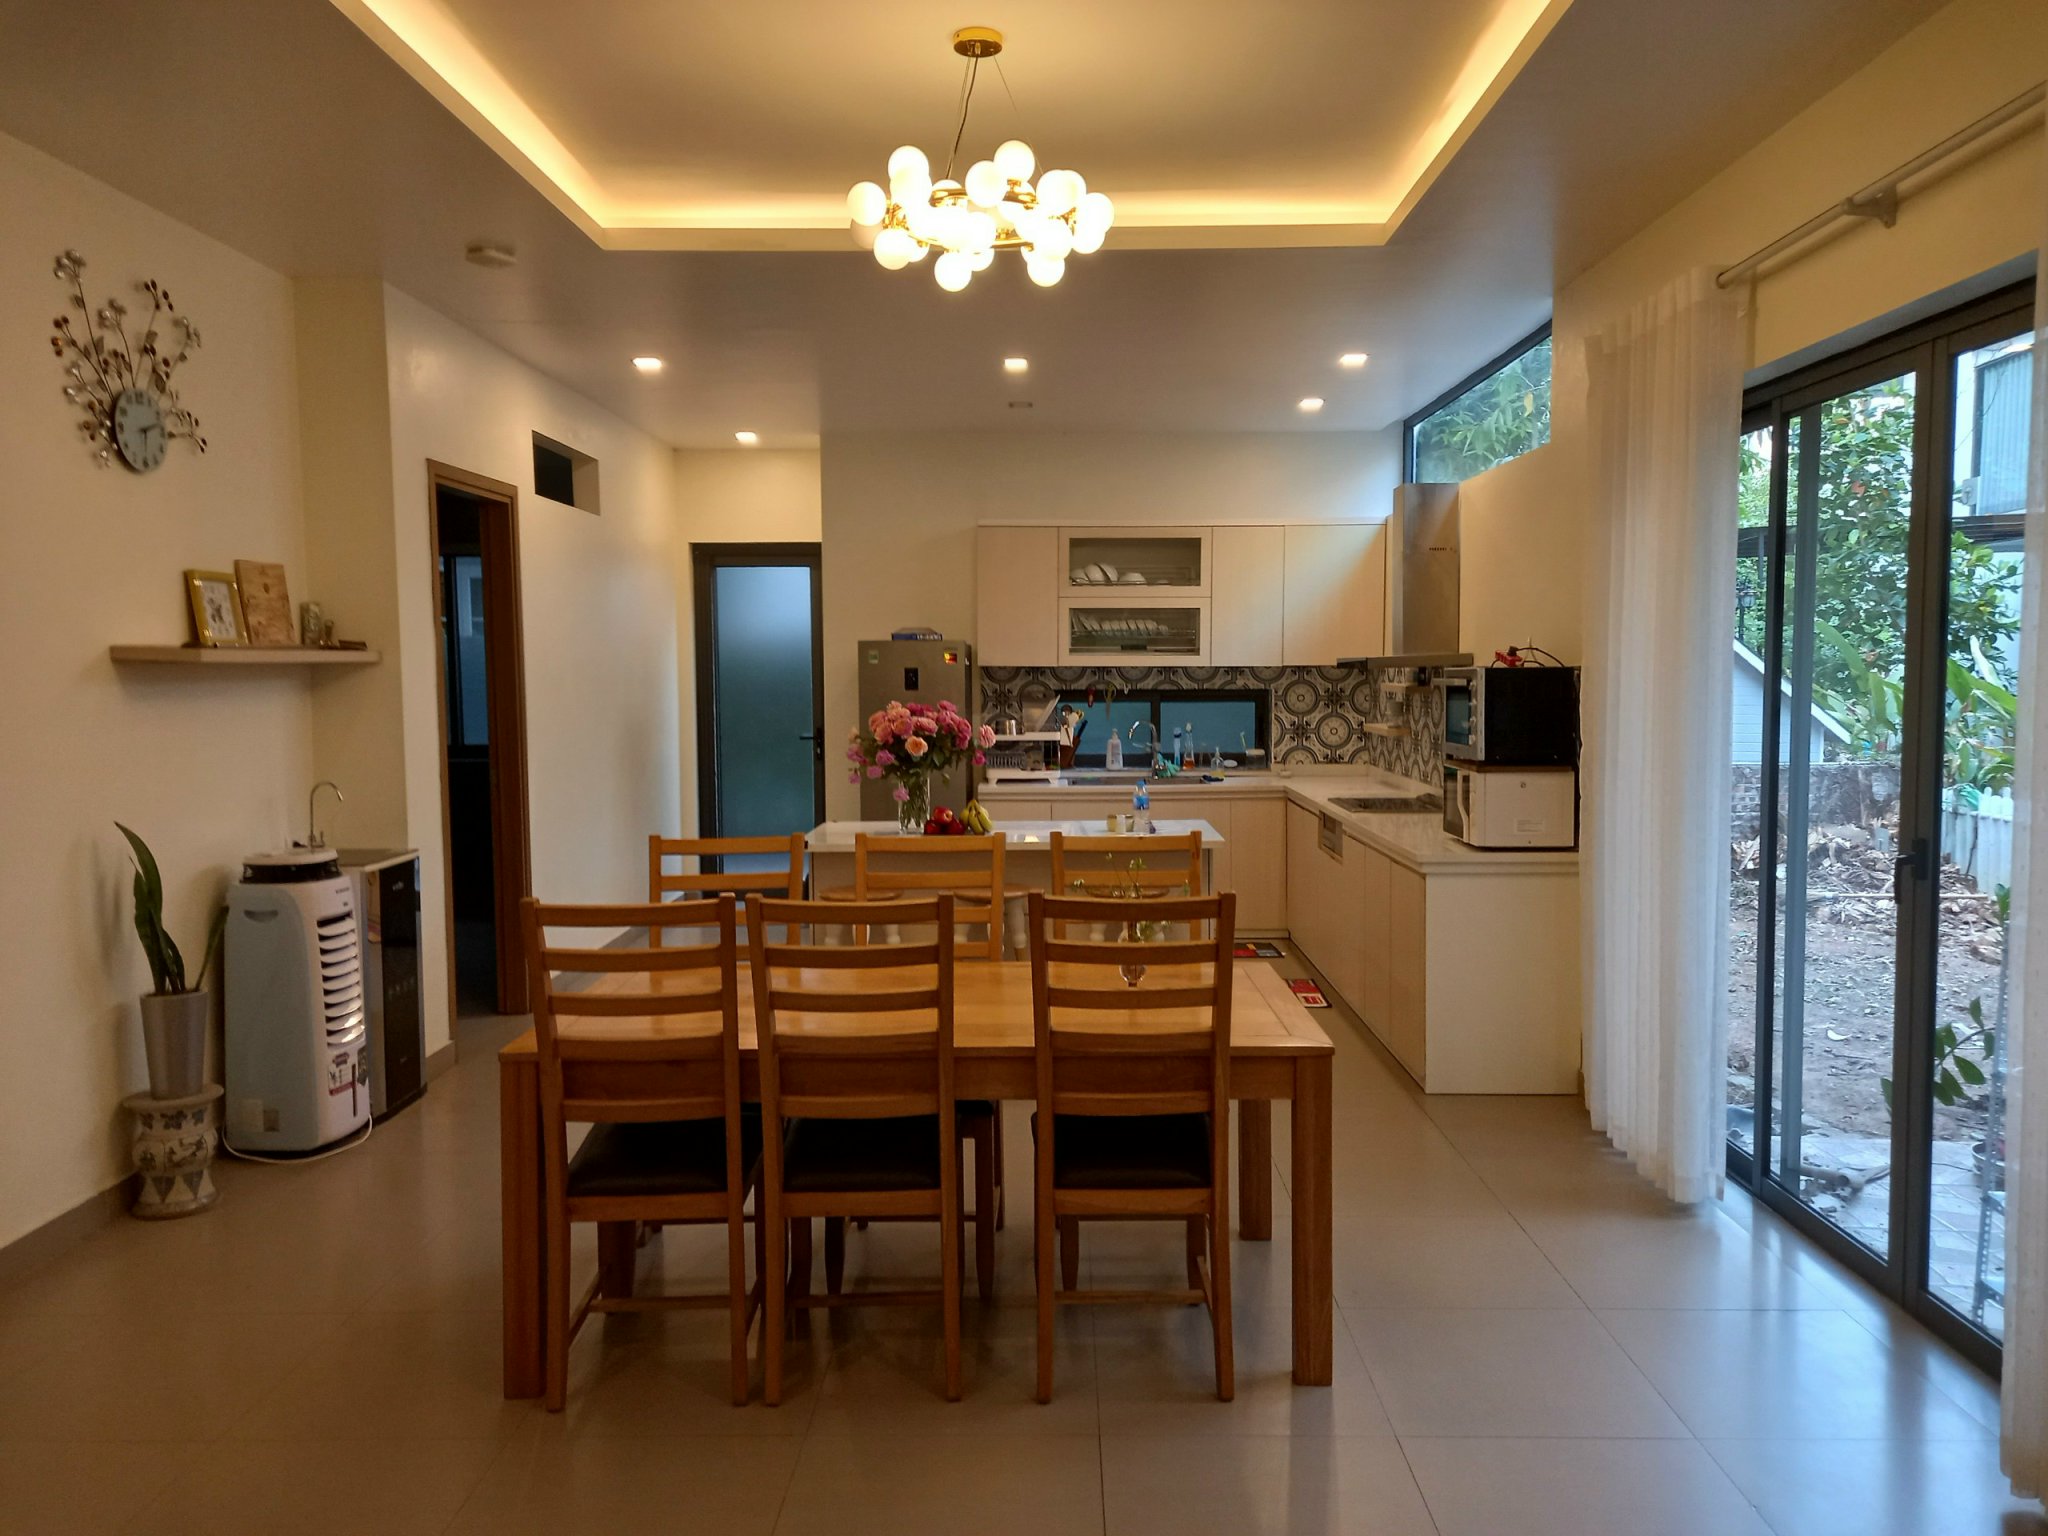 Villa in ecopark with 4 bedrooms , basic furniture